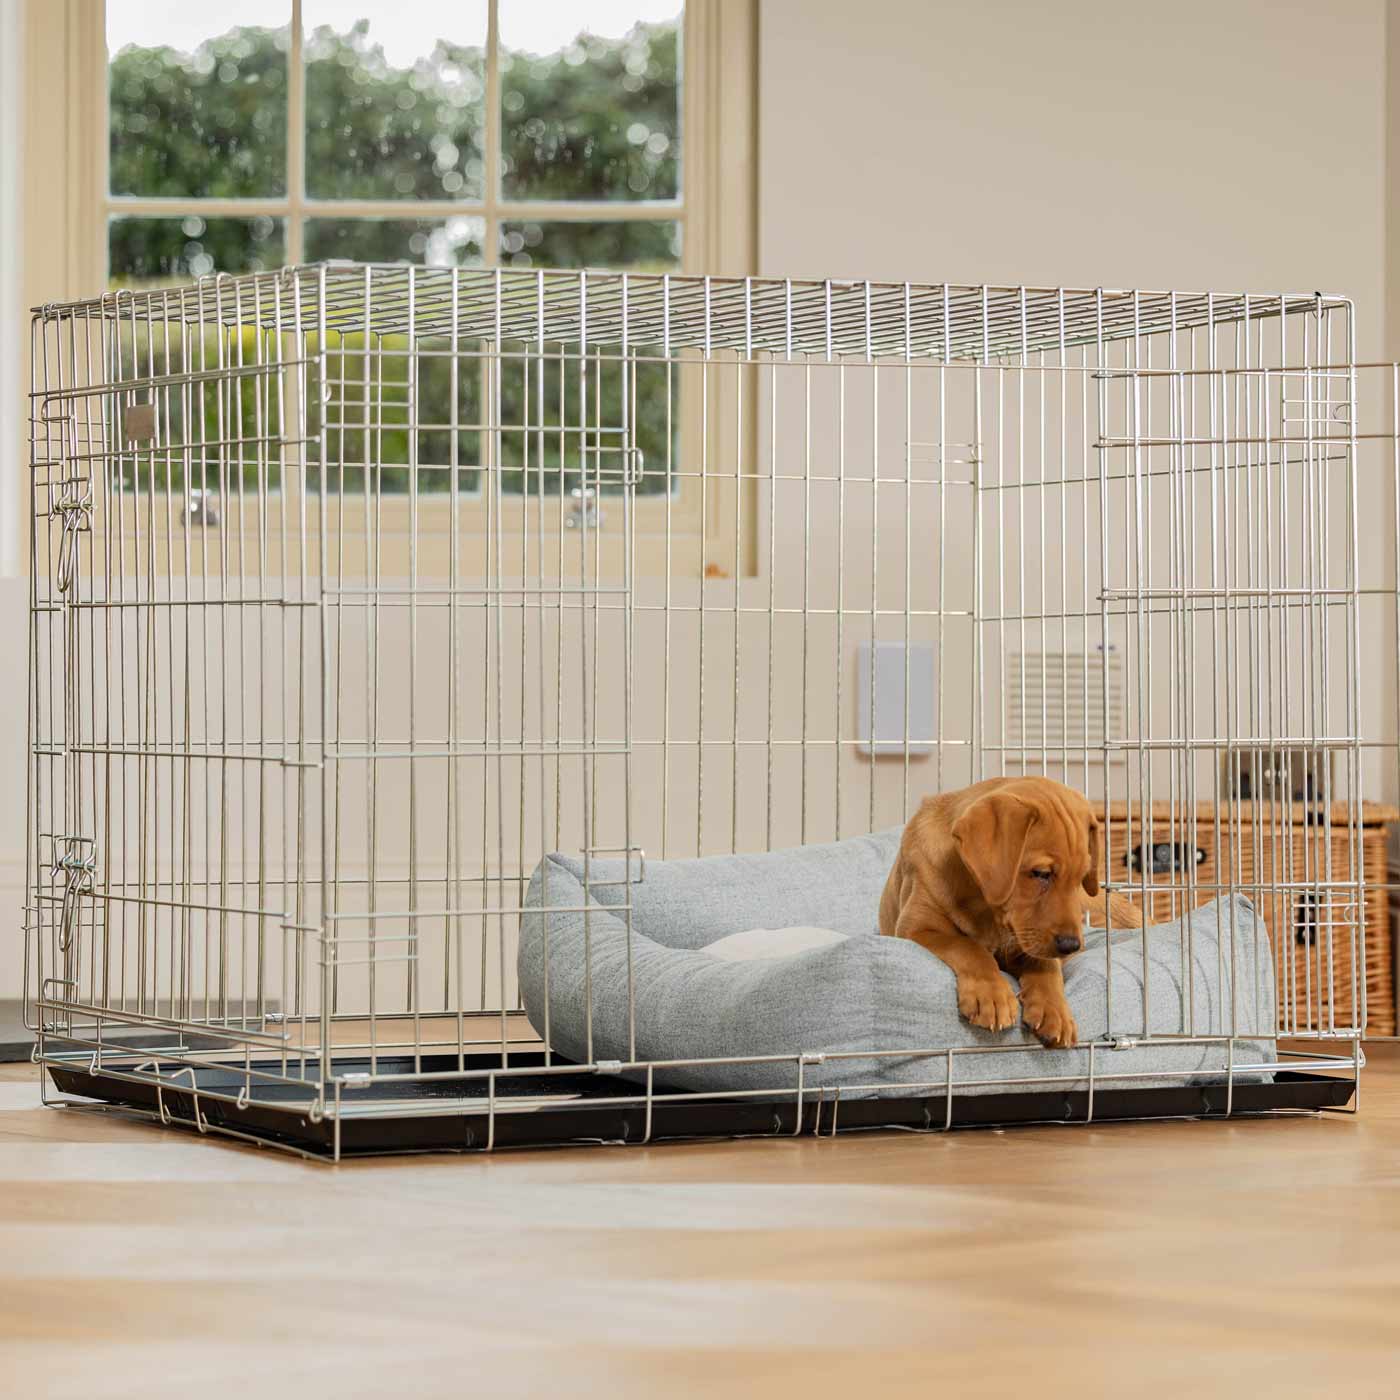 Inchmurrin Cosy & Calm Puppy Box Bed, The Perfect Dog Crate Bed For Pets! To Build The Ultimate Dog Den! In Light Grey Iceberg! Available To Personalise Now at Lords & Labradors 